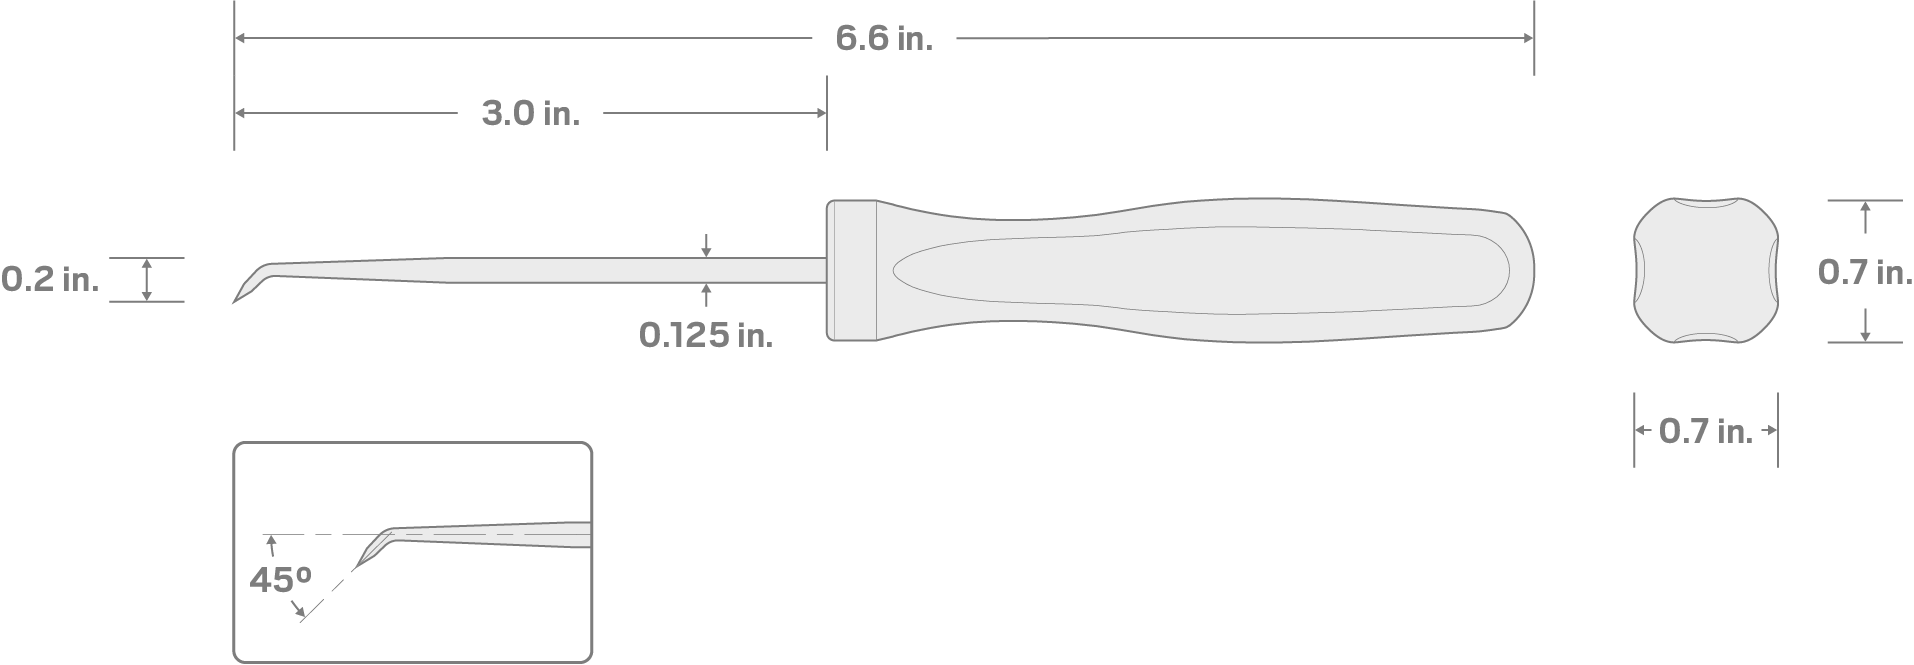 Specs for 45-Degree Bent Pick (1/8 Inch x 3 Inch)